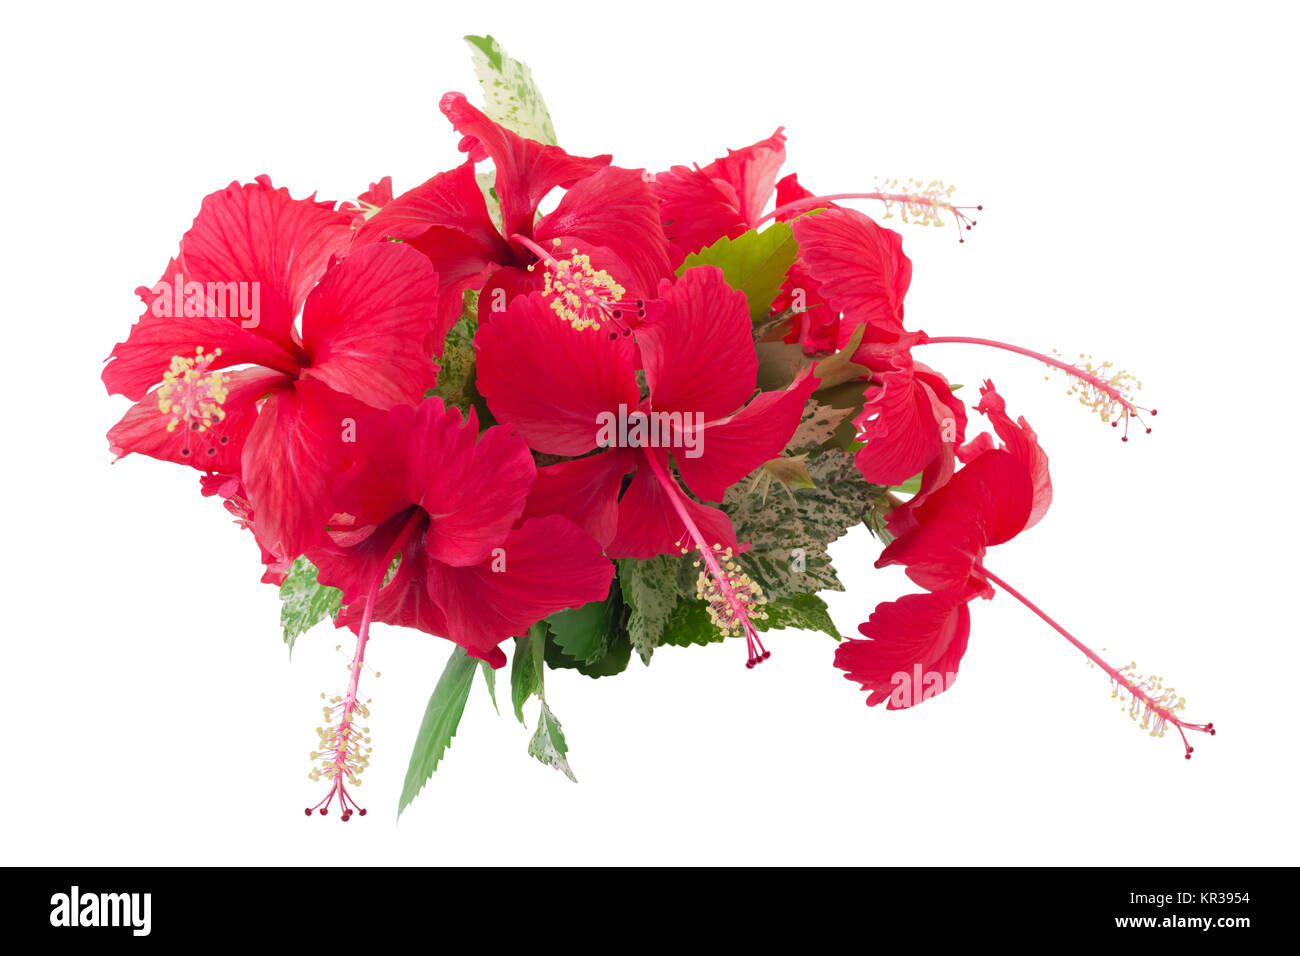 Red 'China Rose' flowers Stock Photo